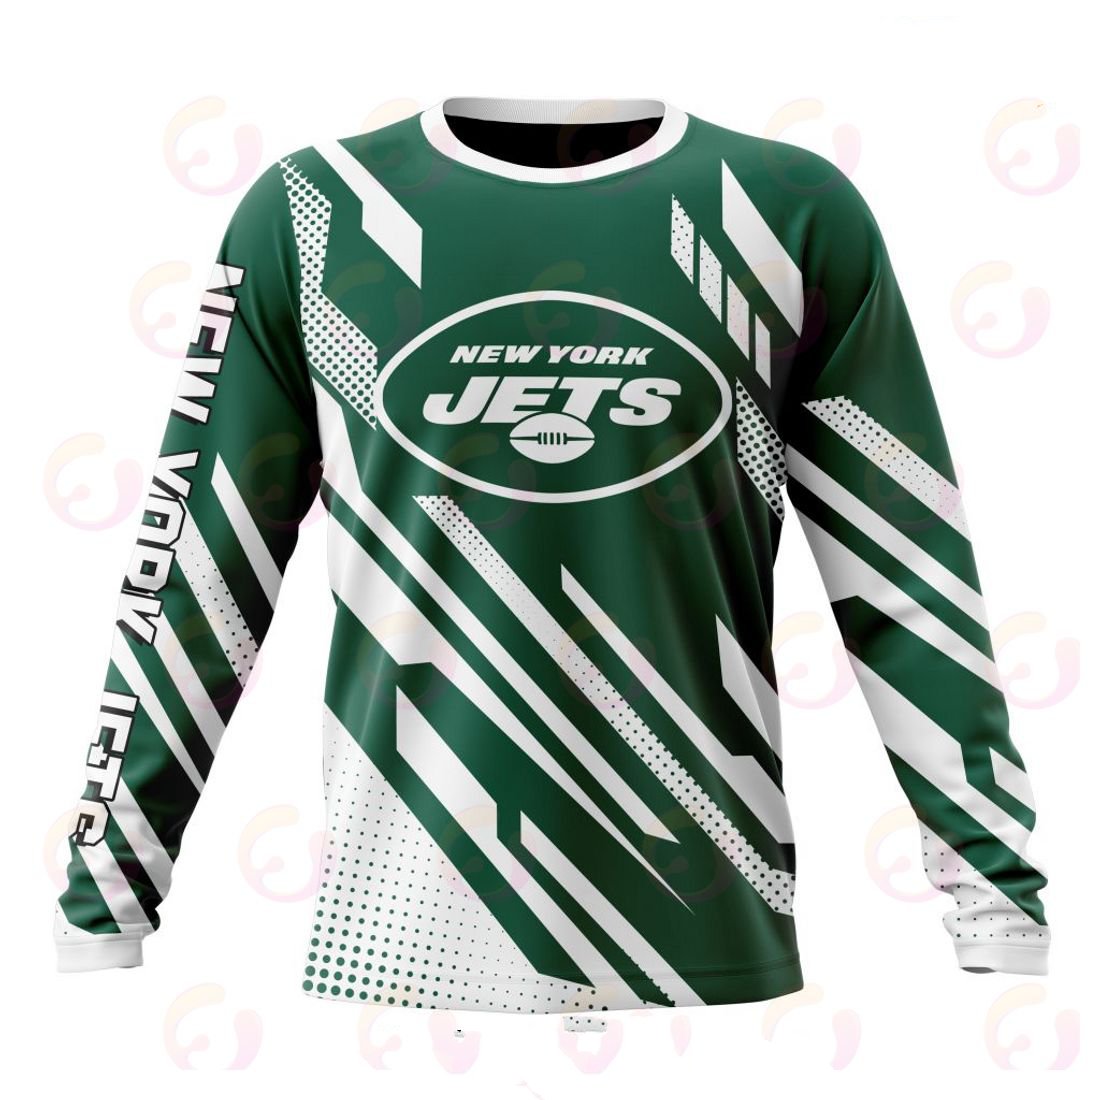 NEW YORK JETS 3D HOODIE SPECIAL MOTOCROSS CONCEPT